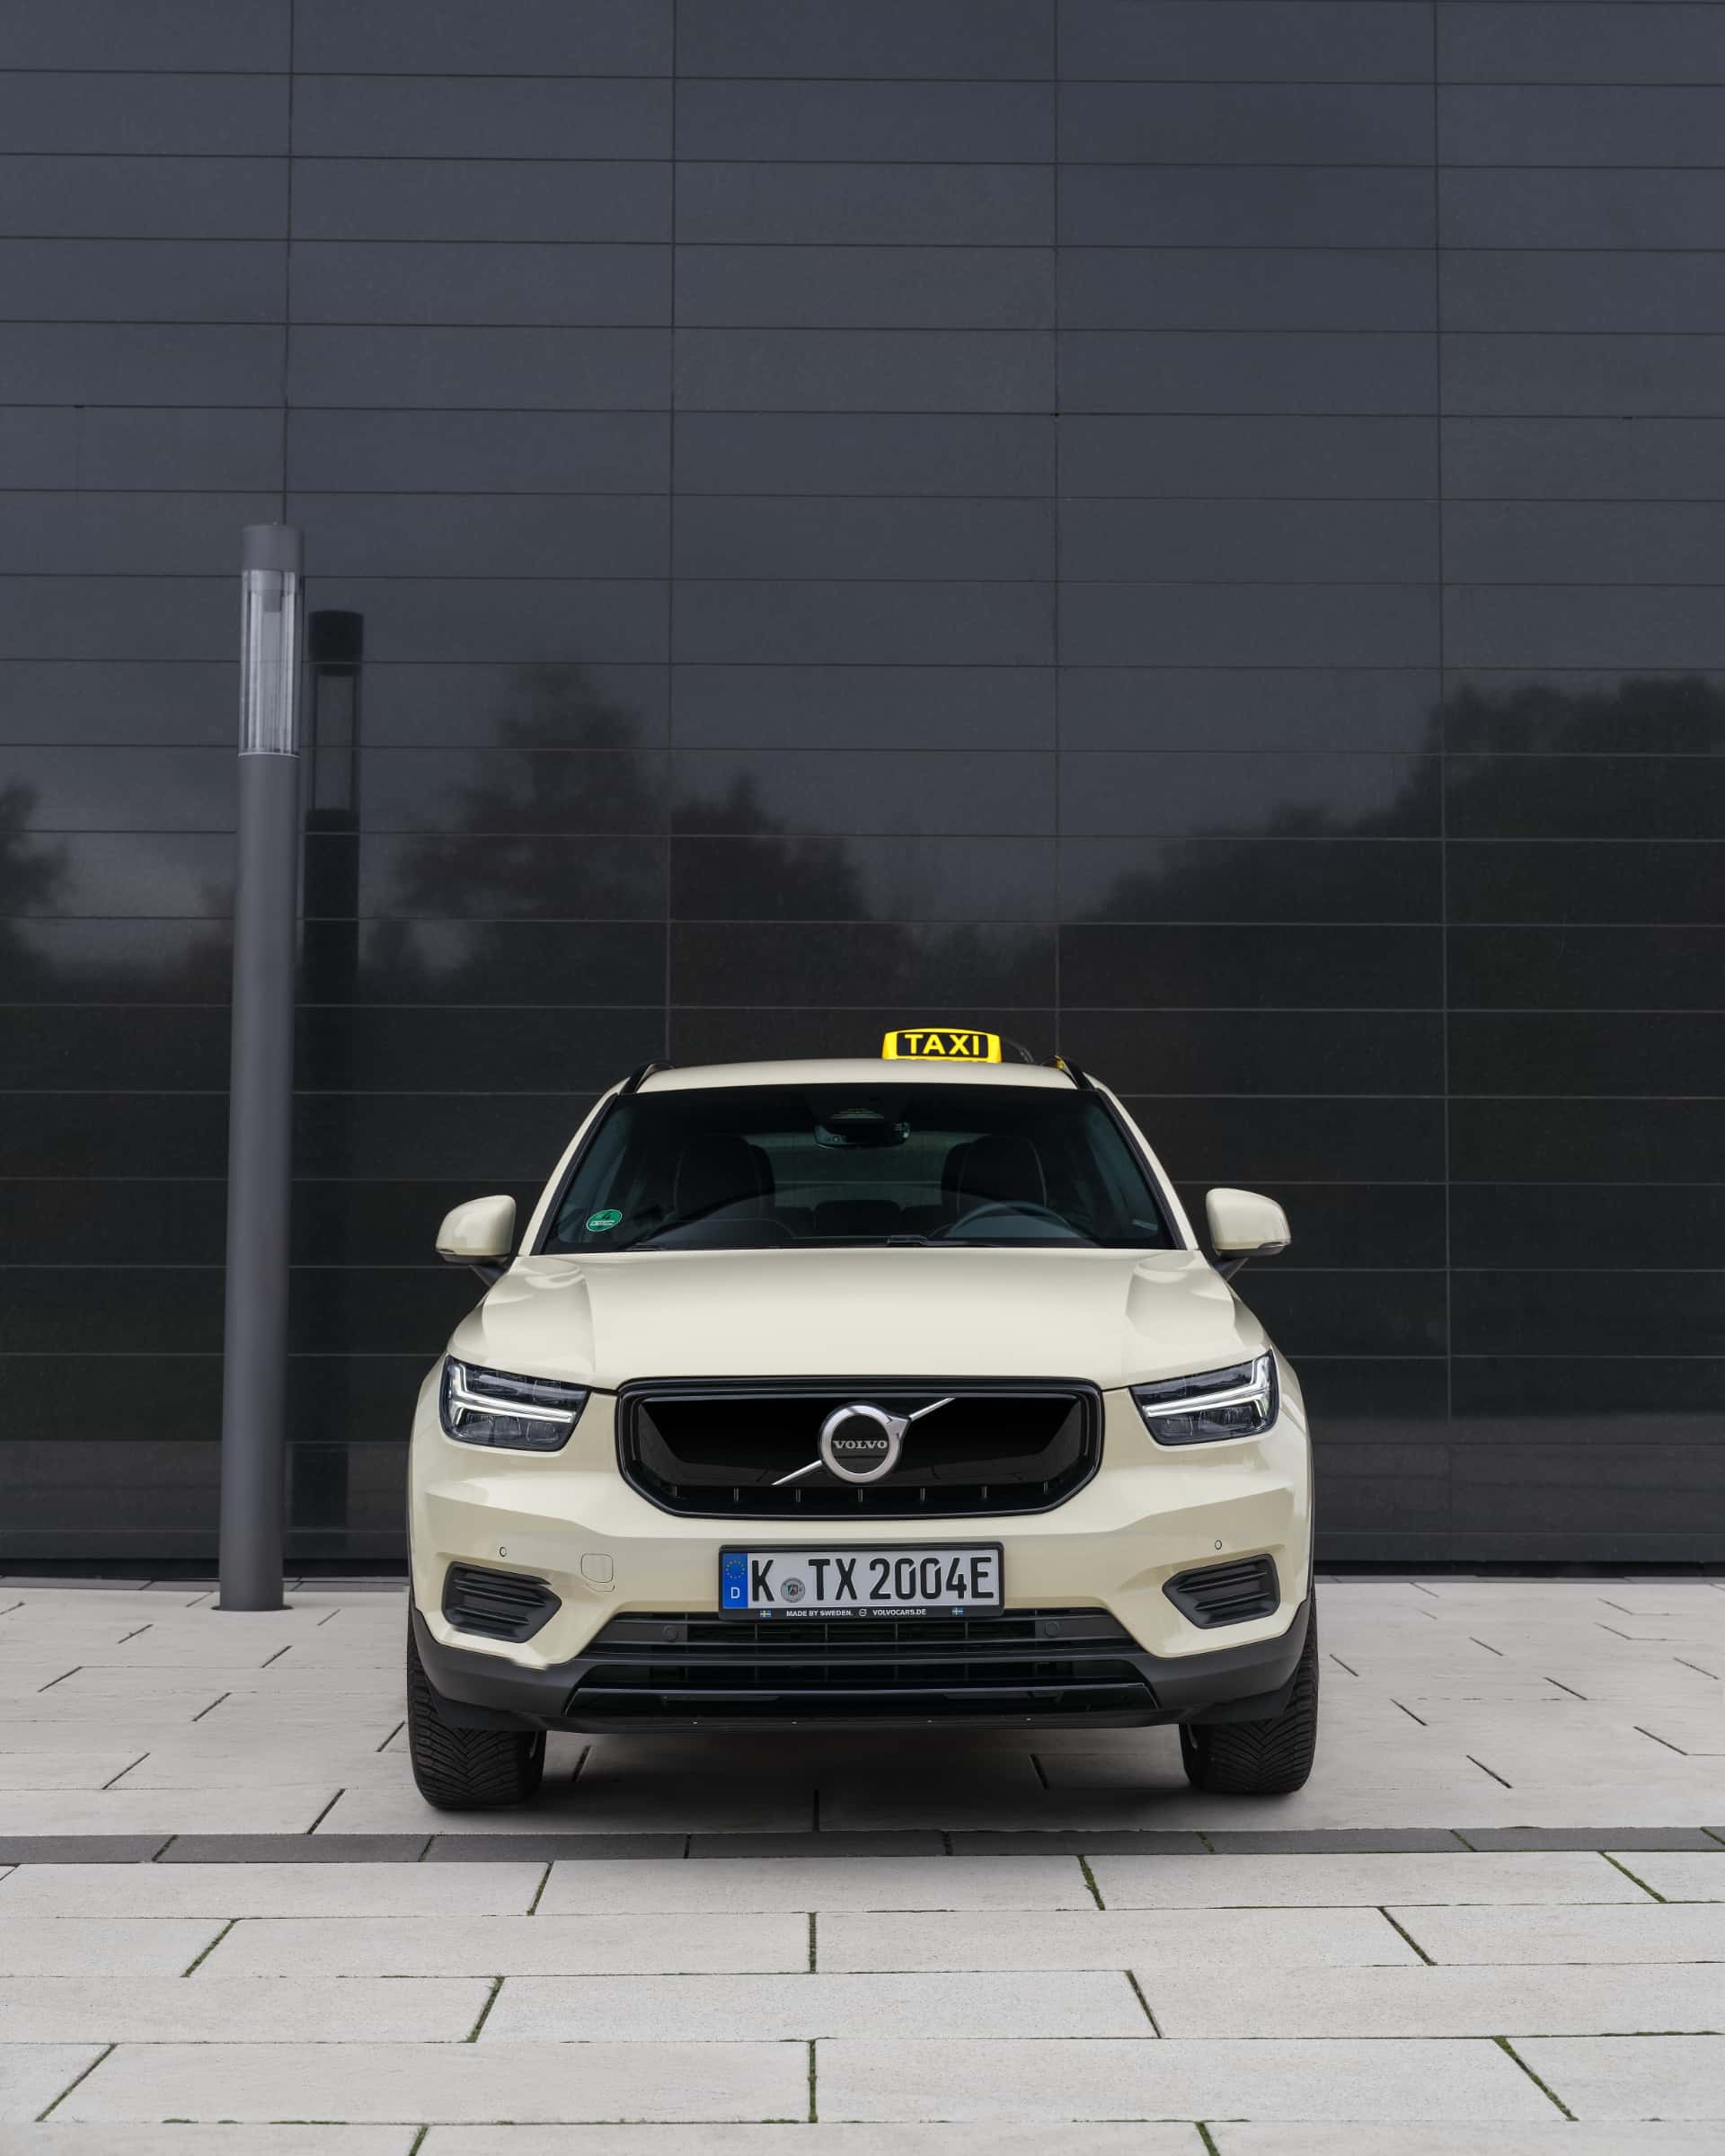 https://www.volvocars.com/images/v/-/media/market-assets/germany/applications/local-pages/beratung-und-kauf/business/taxi/taxi---21x9--2.jpg?h=2400&iar=0&w=1920